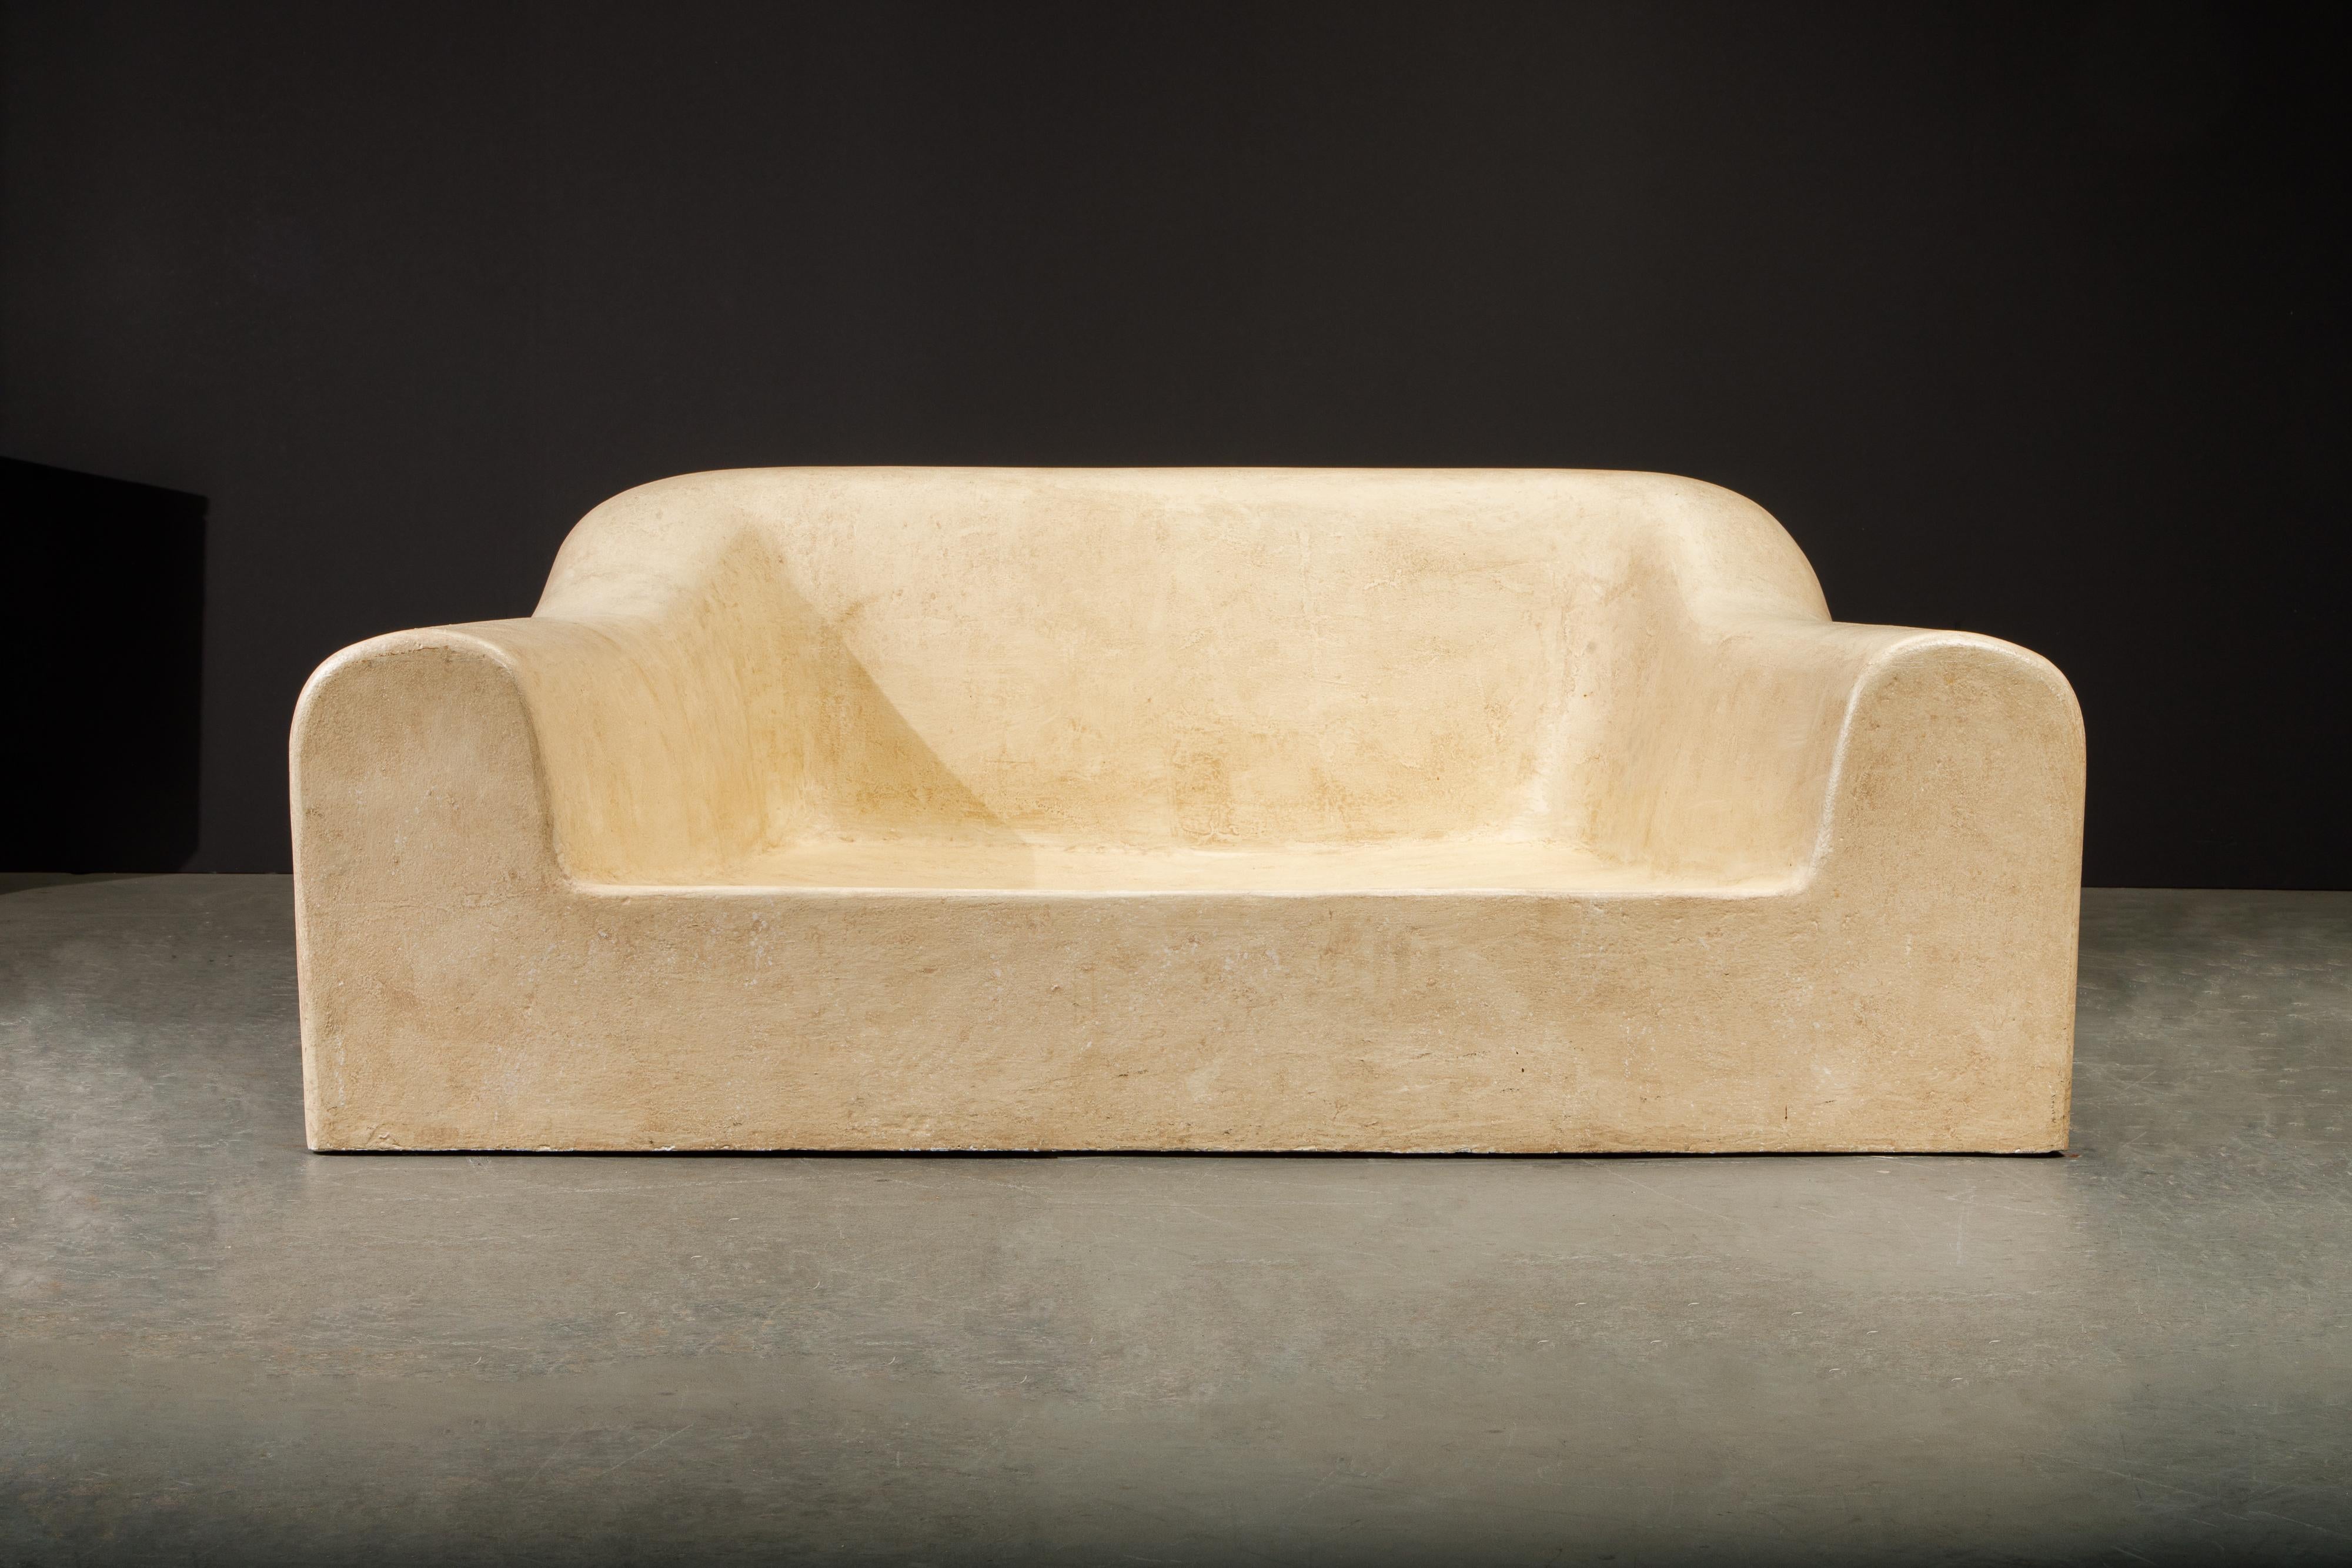 Monumental Pair of Fiberglass 'Jennifer' Lounge Chairs by Michael Taylor, 1970s For Sale 6